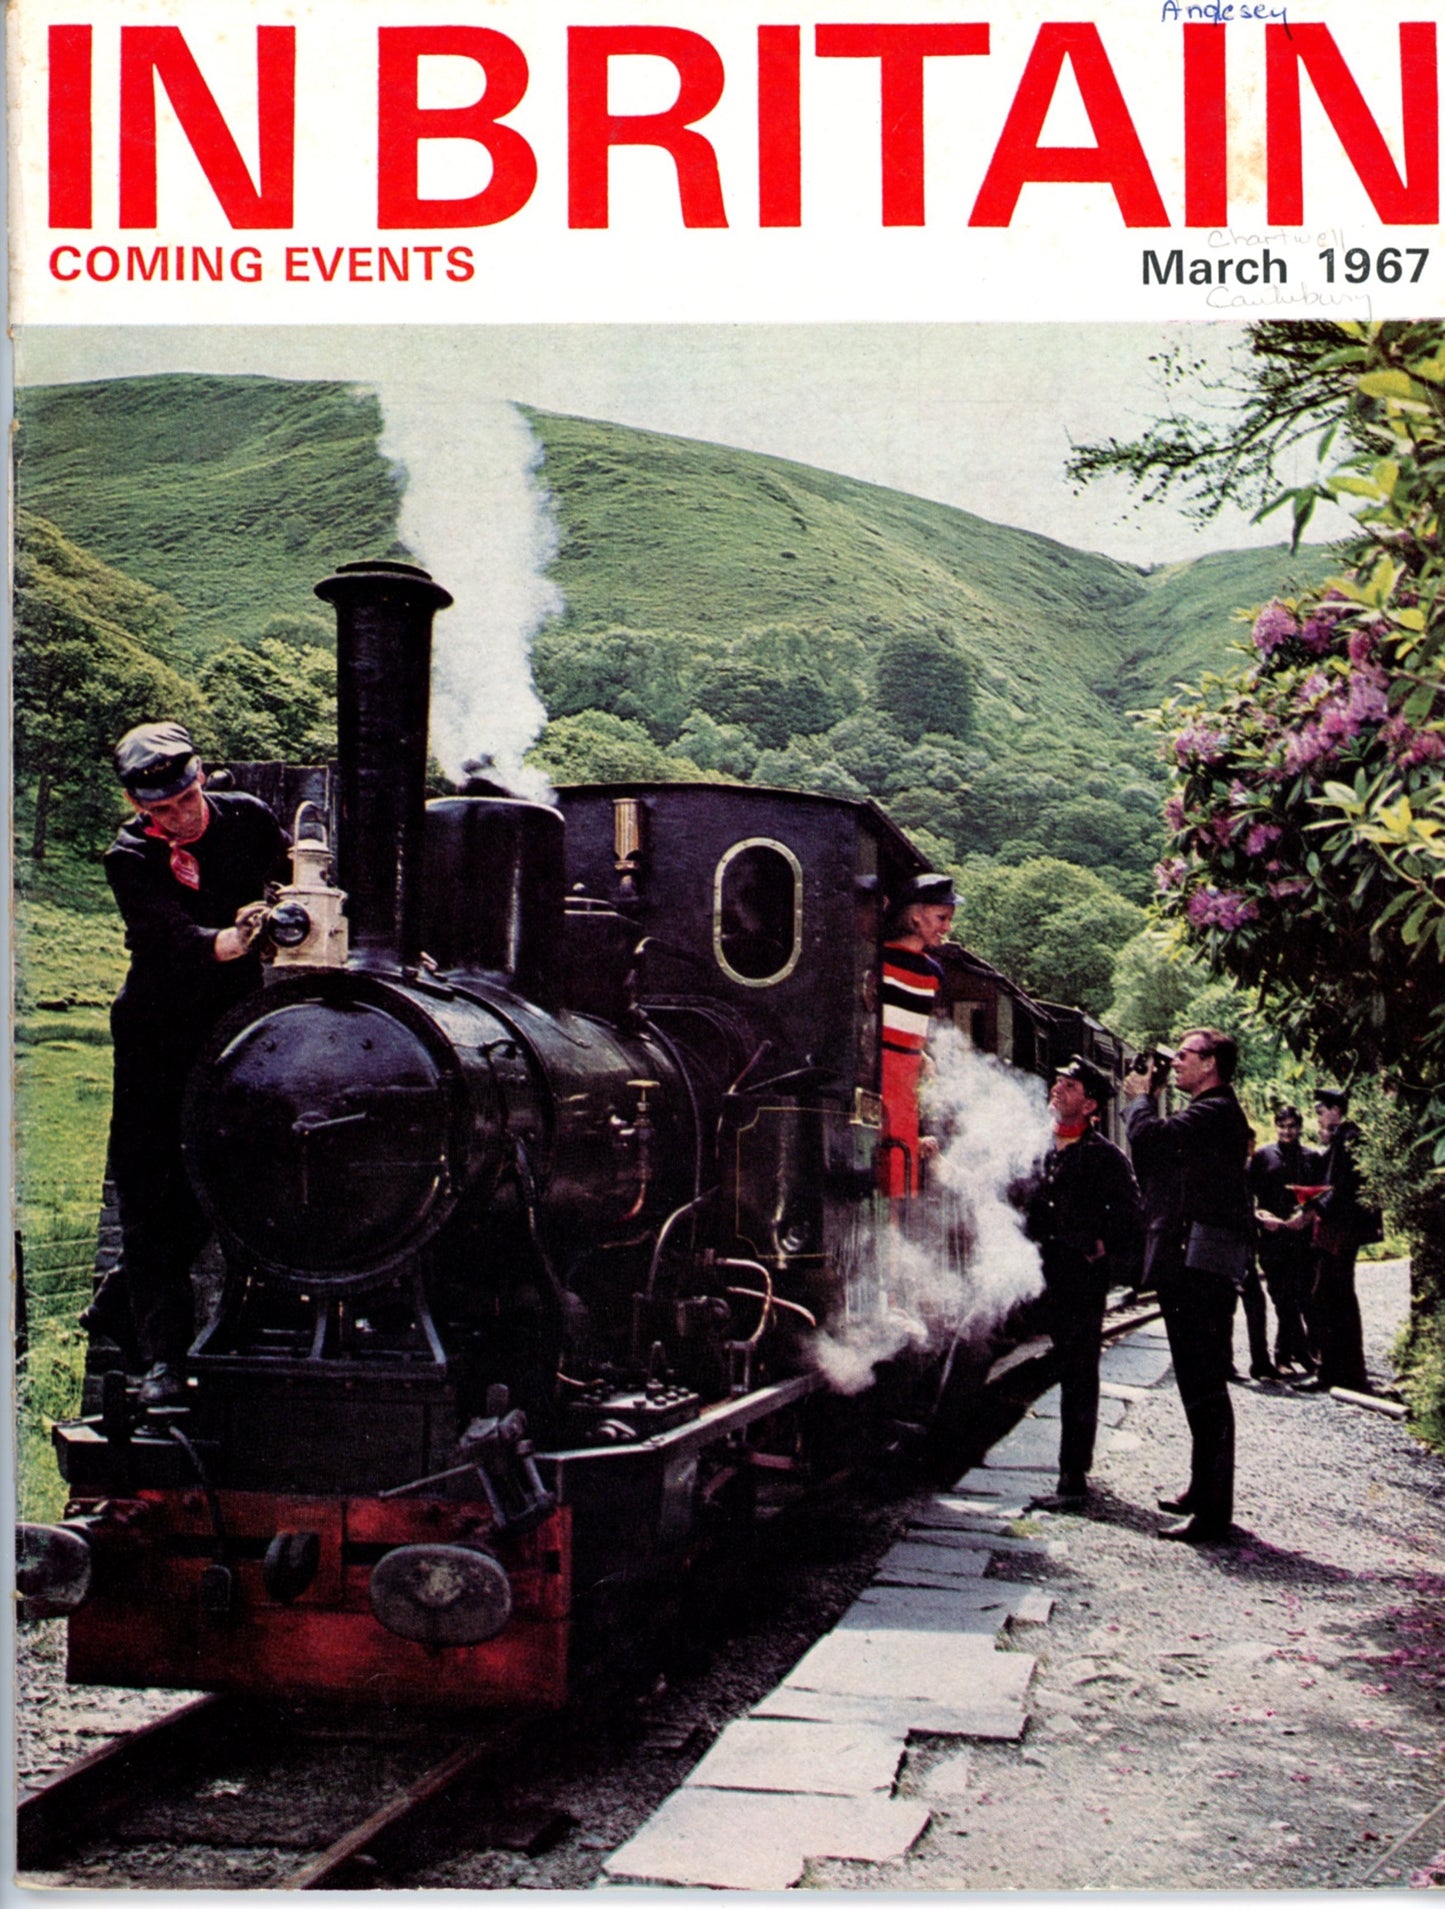 COMING EVENTS IN BRITAIN Vintage Travel Magazines Single Issues © March 1967